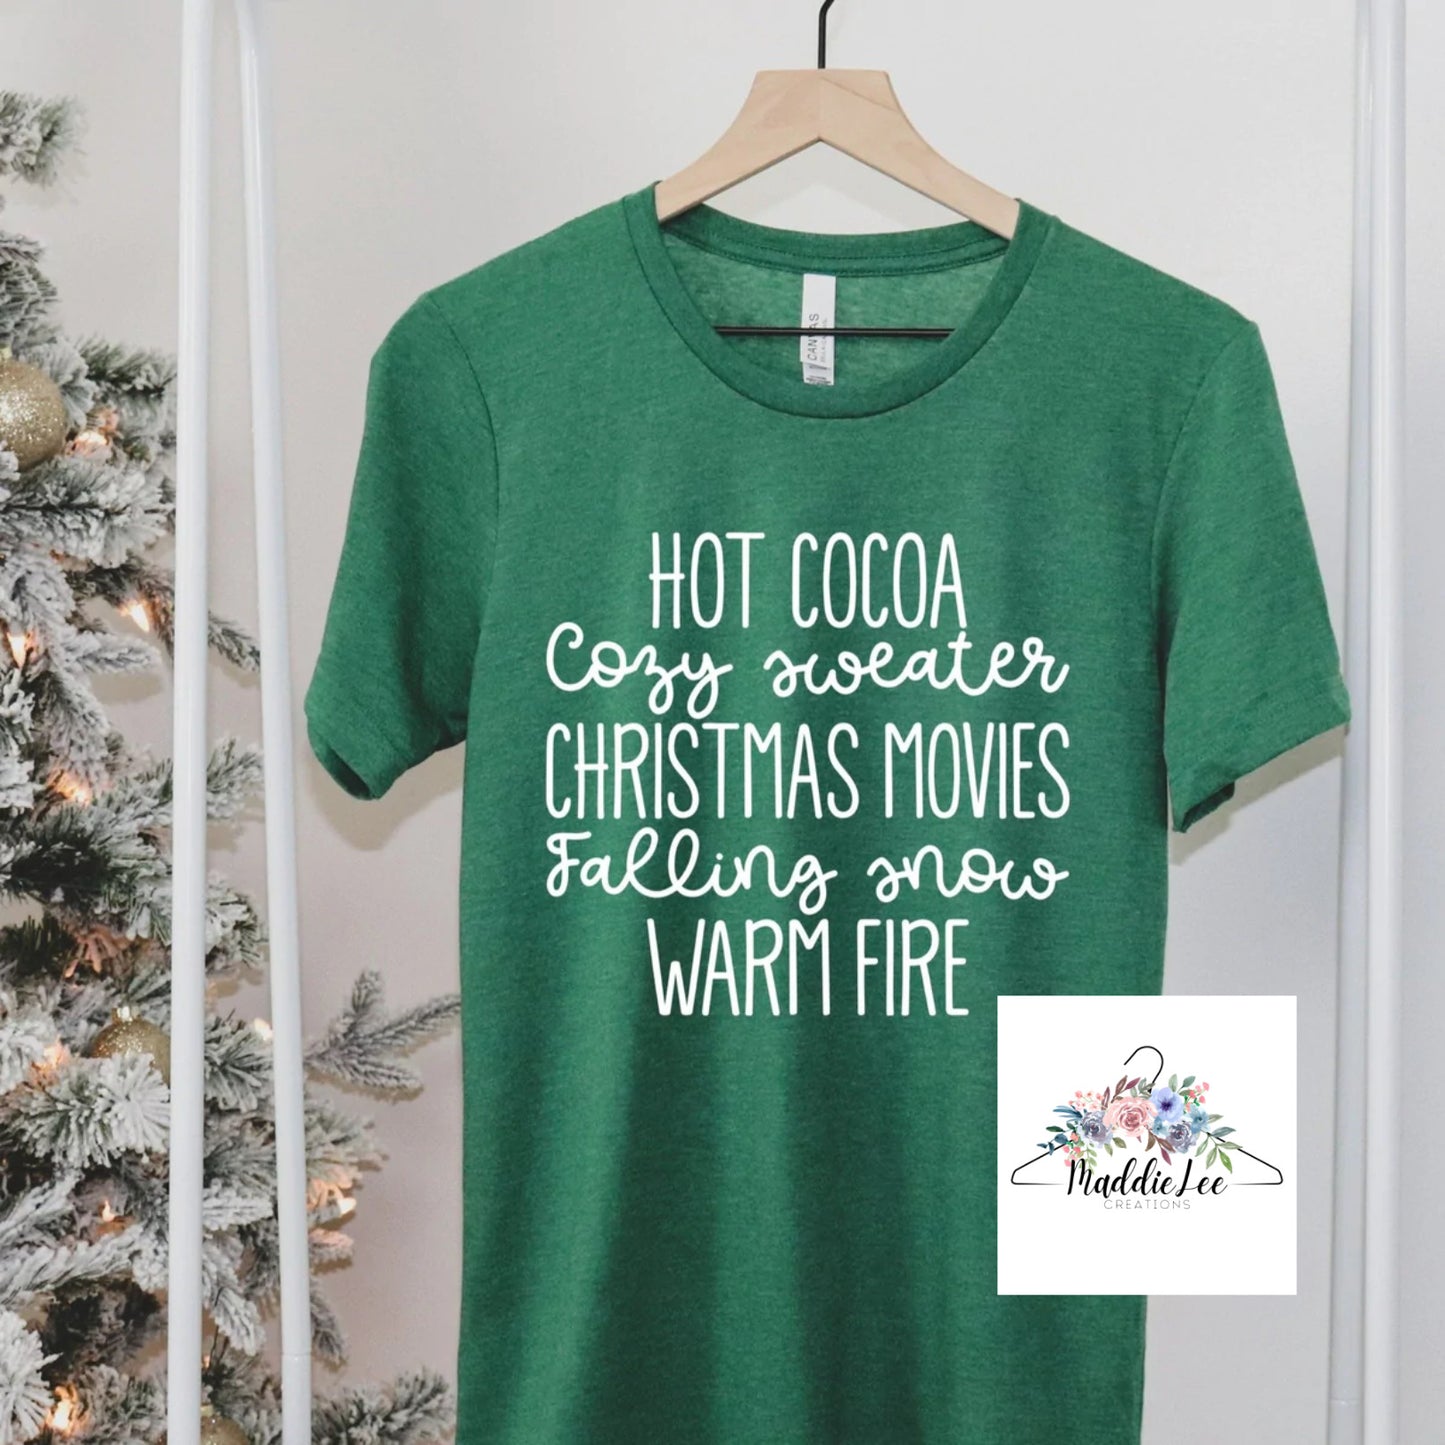 Hot Cocoa, and Winter Items Adult Tee